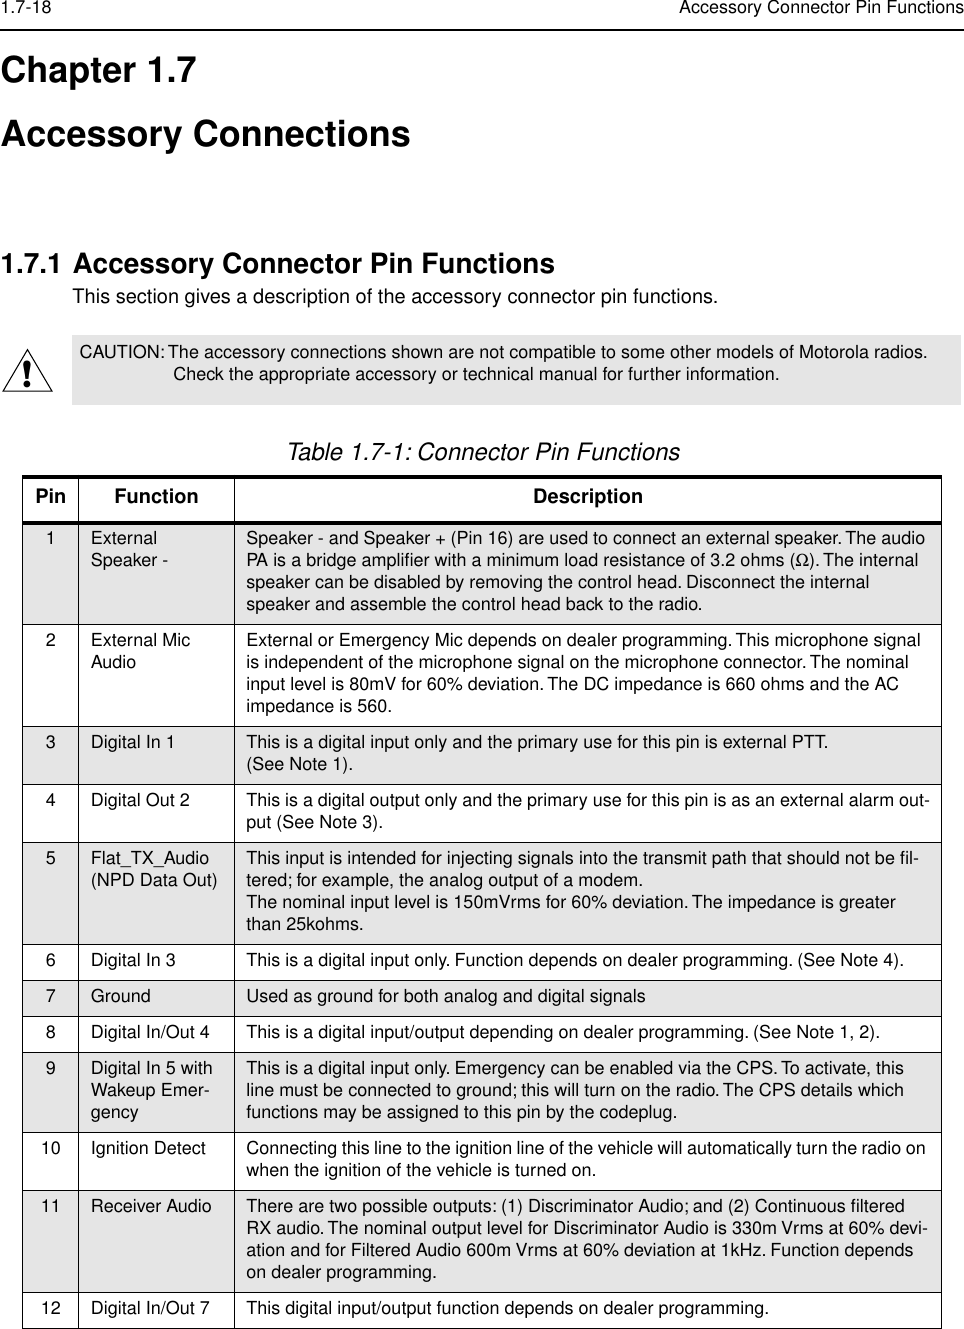 1.7-18 Accessory Connector Pin FunctionsChapter 1.7Accessory Connections1.7.1 Accessory Connector Pin FunctionsThis section gives a description of the accessory connector pin functions.CAUTION: The accessory connections shown are not compatible to some other models of Motorola radios. Check the appropriate accessory or technical manual for further information.Table 1.7-1: Connector Pin FunctionsPin Function Description1 External Speaker - Speaker - and Speaker + (Pin 16) are used to connect an external speaker. The audio PA is a bridge ampliﬁer with a minimum load resistance of 3.2 ohms (Ω). The internal speaker can be disabled by removing the control head. Disconnect the internal speaker and assemble the control head back to the radio.2 External Mic Audio External or Emergency Mic depends on dealer programming. This microphone signal is independent of the microphone signal on the microphone connector. The nominal input level is 80mV for 60% deviation. The DC impedance is 660 ohms and the AC impedance is 560.3 Digital In 1 This is a digital input only and the primary use for this pin is external PTT. (See Note 1).4 Digital Out 2 This is a digital output only and the primary use for this pin is as an external alarm out-put (See Note 3).5 Flat_TX_Audio (NPD Data Out) This input is intended for injecting signals into the transmit path that should not be ﬁl-tered; for example, the analog output of a modem.The nominal input level is 150mVrms for 60% deviation. The impedance is greater than 25kohms.6 Digital In 3 This is a digital input only. Function depends on dealer programming. (See Note 4).7 Ground Used as ground for both analog and digital signals8 Digital In/Out 4 This is a digital input/output depending on dealer programming. (See Note 1, 2).9 Digital In 5 with Wakeup Emer-gencyThis is a digital input only. Emergency can be enabled via the CPS. To activate, this line must be connected to ground; this will turn on the radio. The CPS details which functions may be assigned to this pin by the codeplug.10 Ignition Detect Connecting this line to the ignition line of the vehicle will automatically turn the radio on when the ignition of the vehicle is turned on.11 Receiver Audio There are two possible outputs: (1) Discriminator Audio; and (2) Continuous ﬁltered RX audio. The nominal output level for Discriminator Audio is 330m Vrms at 60% devi-ation and for Filtered Audio 600m Vrms at 60% deviation at 1kHz. Function depends on dealer programming. 12 Digital In/Out 7 This digital input/output function depends on dealer programming.!